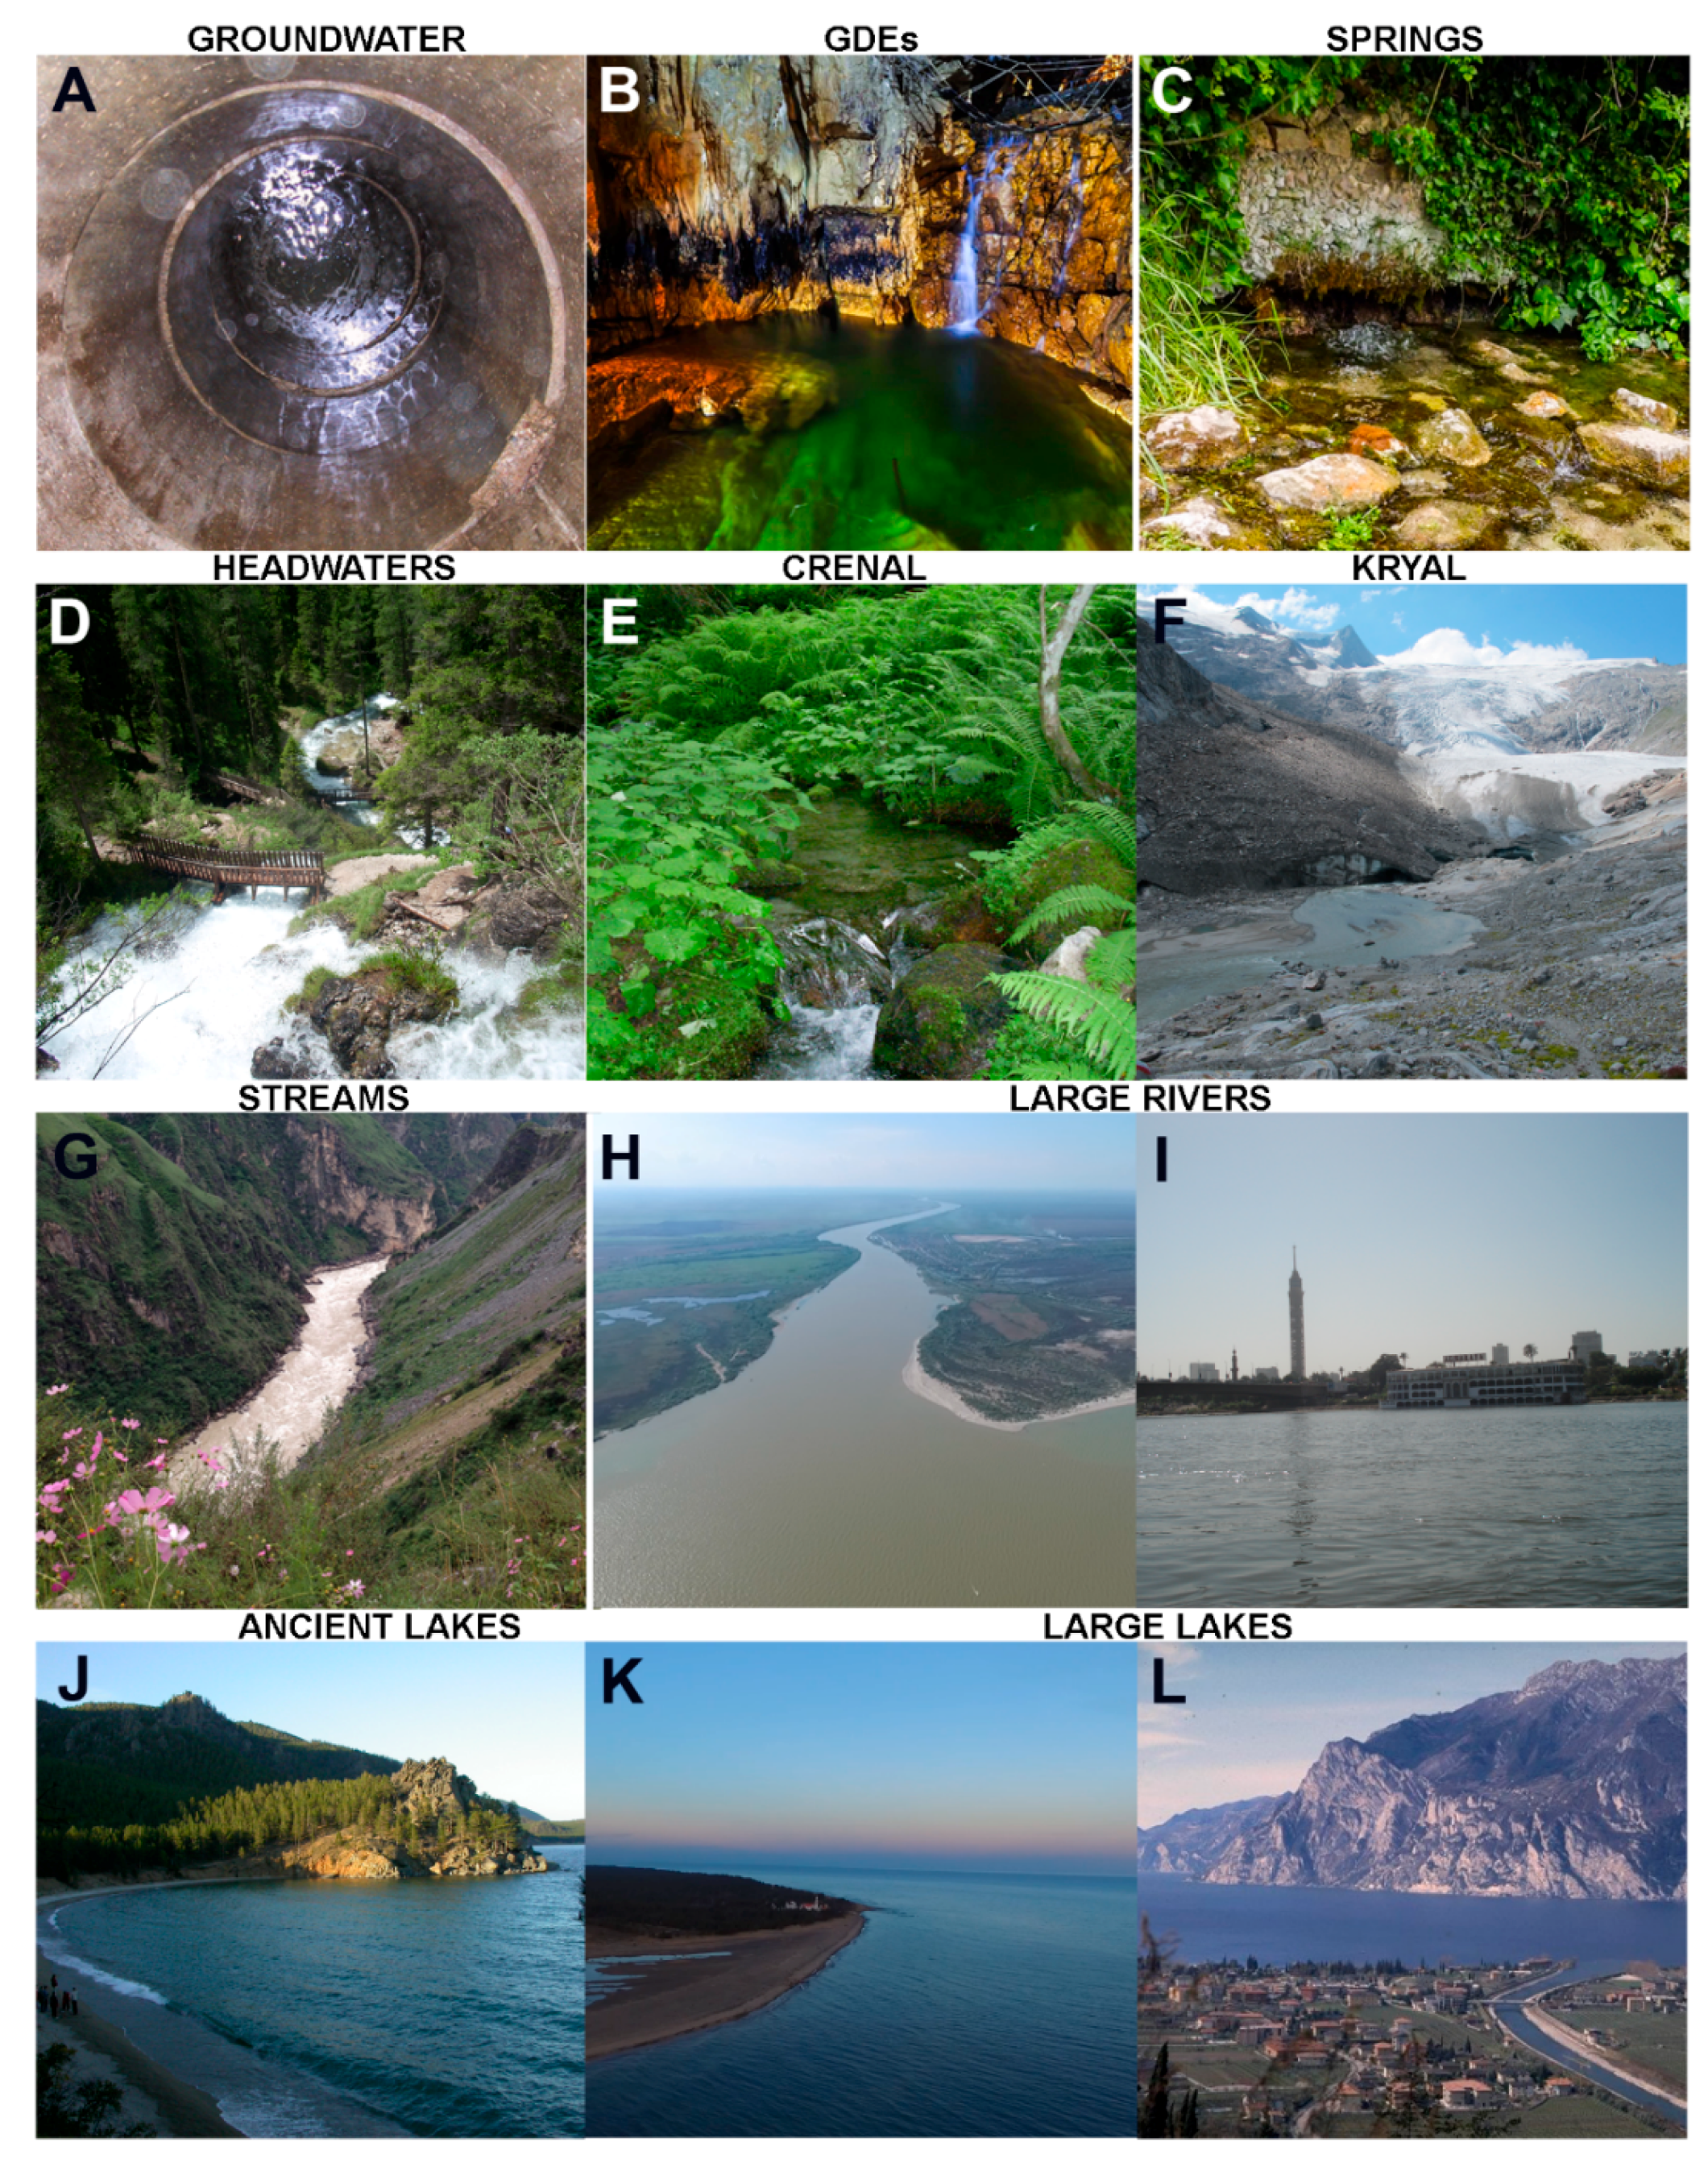 Water | Free Full-Text | Characteristics, Main Impacts, and Stewardship of Natural and Freshwater Environments: Consequences for Biodiversity Conservation | HTML